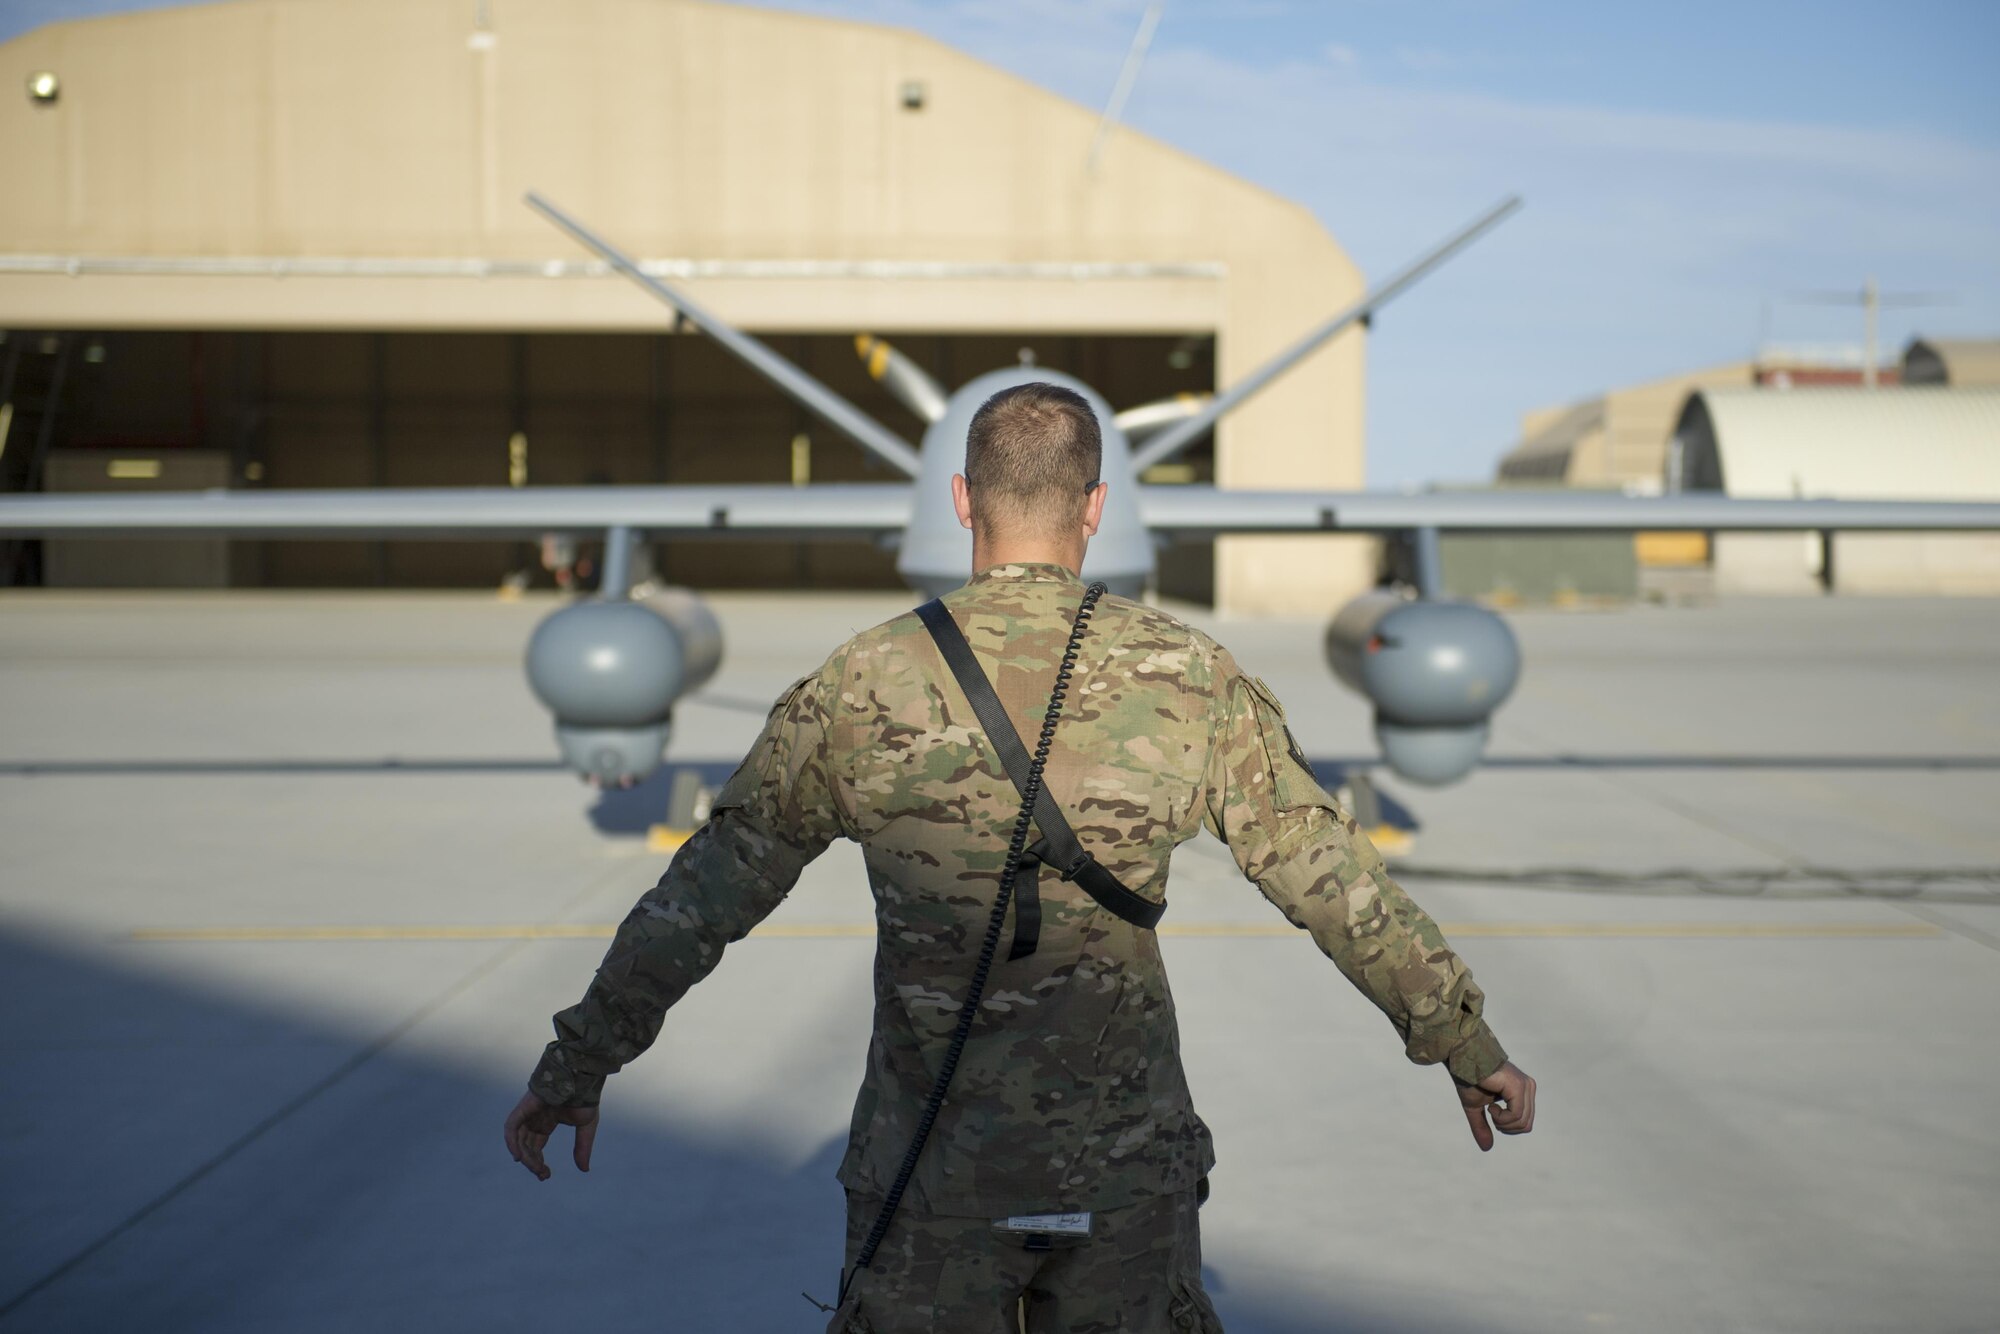 Airman 1st Class Landon, 62nd Expeditionary Reconnaissance Squadron aircraft specialist, performs preflight checks on an MQ-9 Reaper equipped with Gorgon Stare prior to a sortie at Kandahar Airfield, Afghanistan, Dec. 5, 2015. Gorgon Stare provides day or night continuous broad-area motion imagery to find and fix targets within the field of view. (U.S. Air Force photo by Tech. Sgt. Robert Cloys/Released)